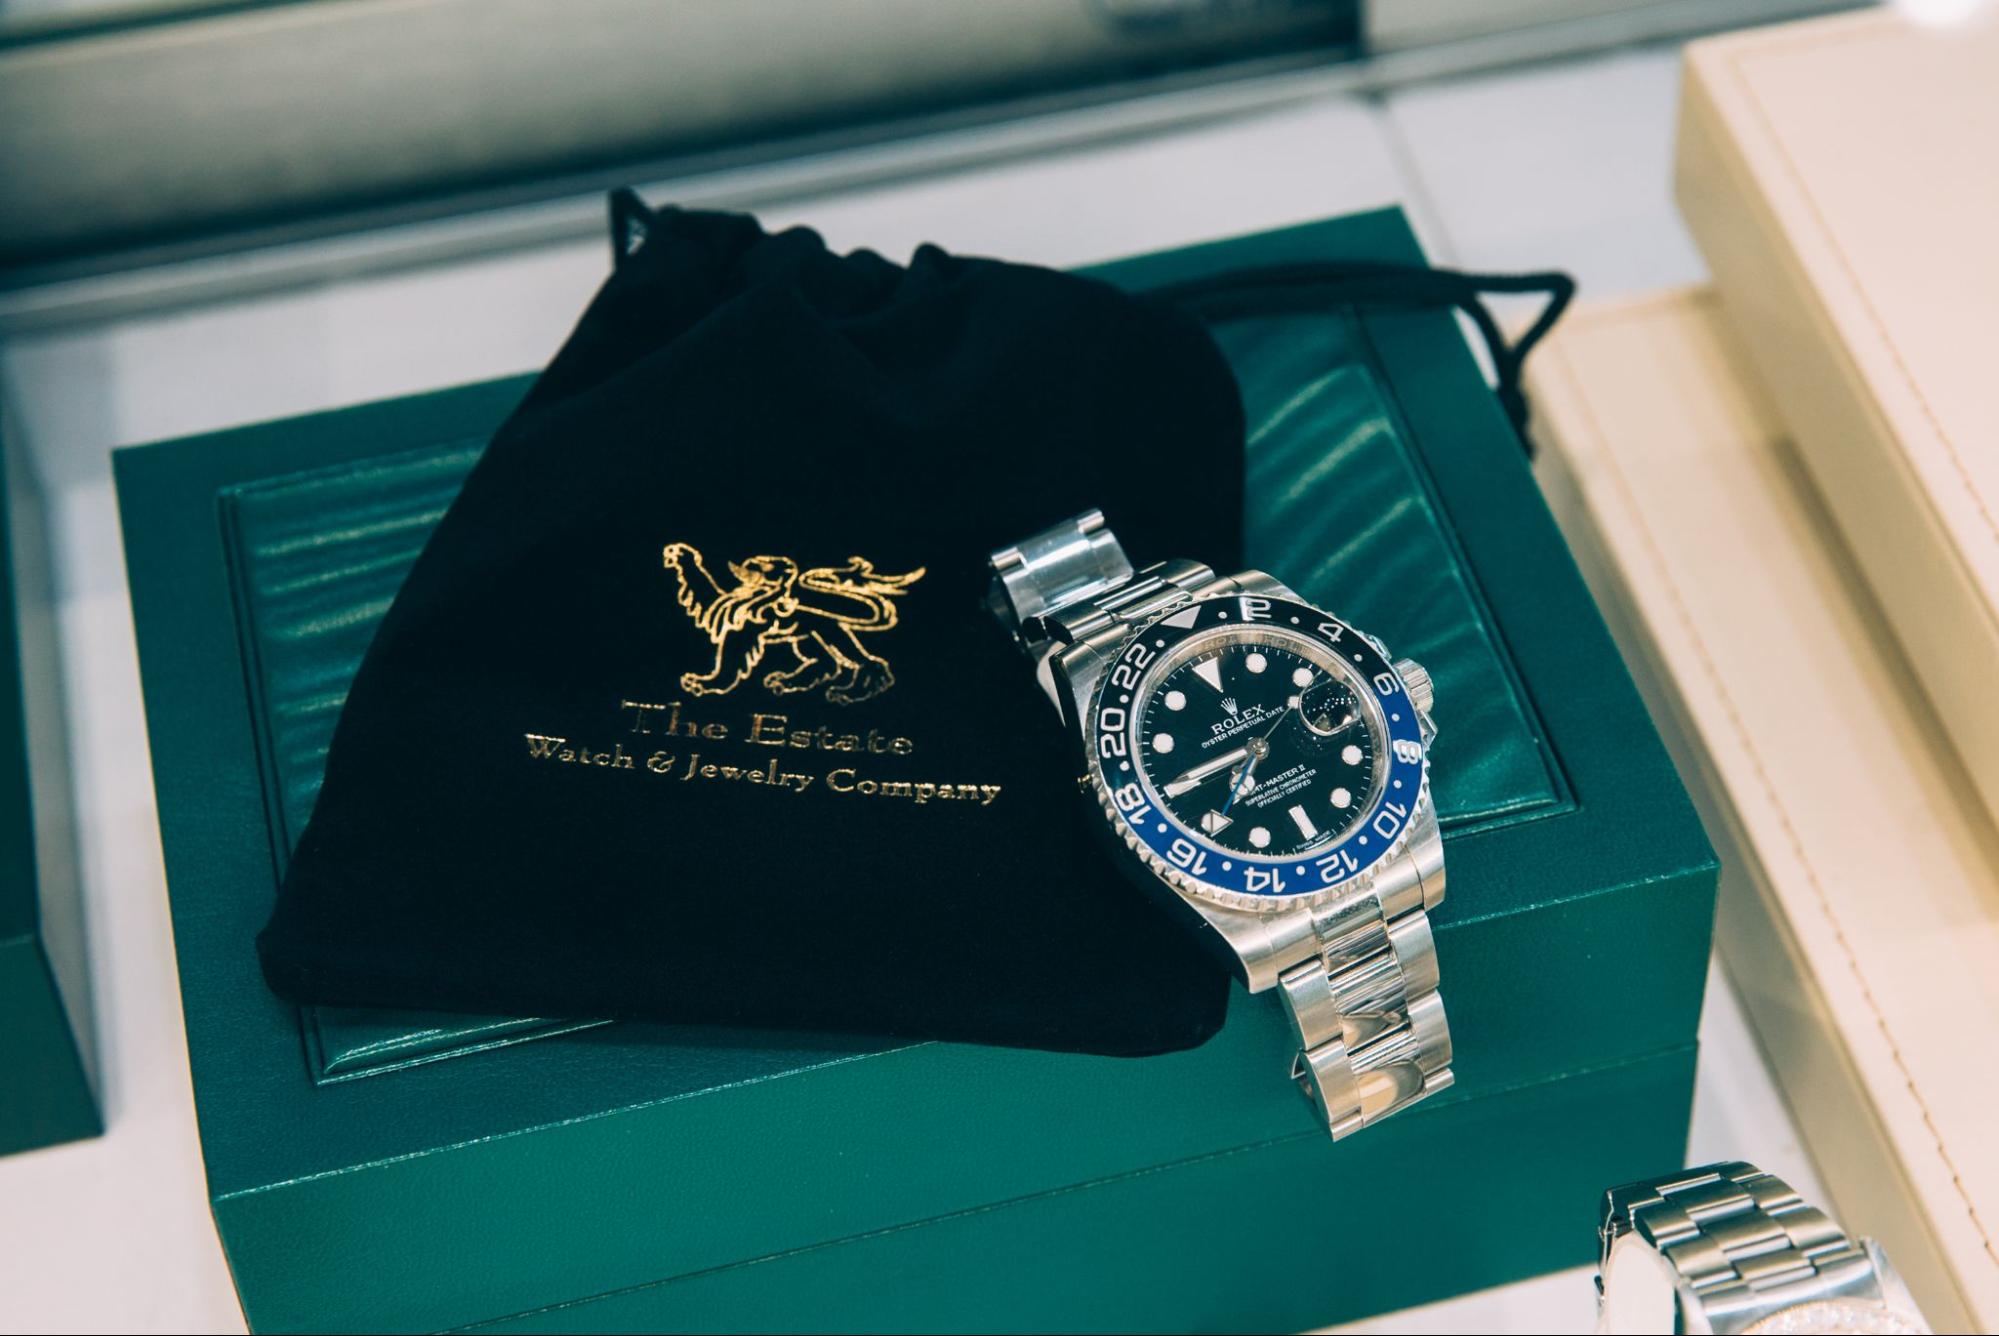 How to Buy a Rolex Watch: A Step by Guide – The Estate Watch And Jewelry Company®